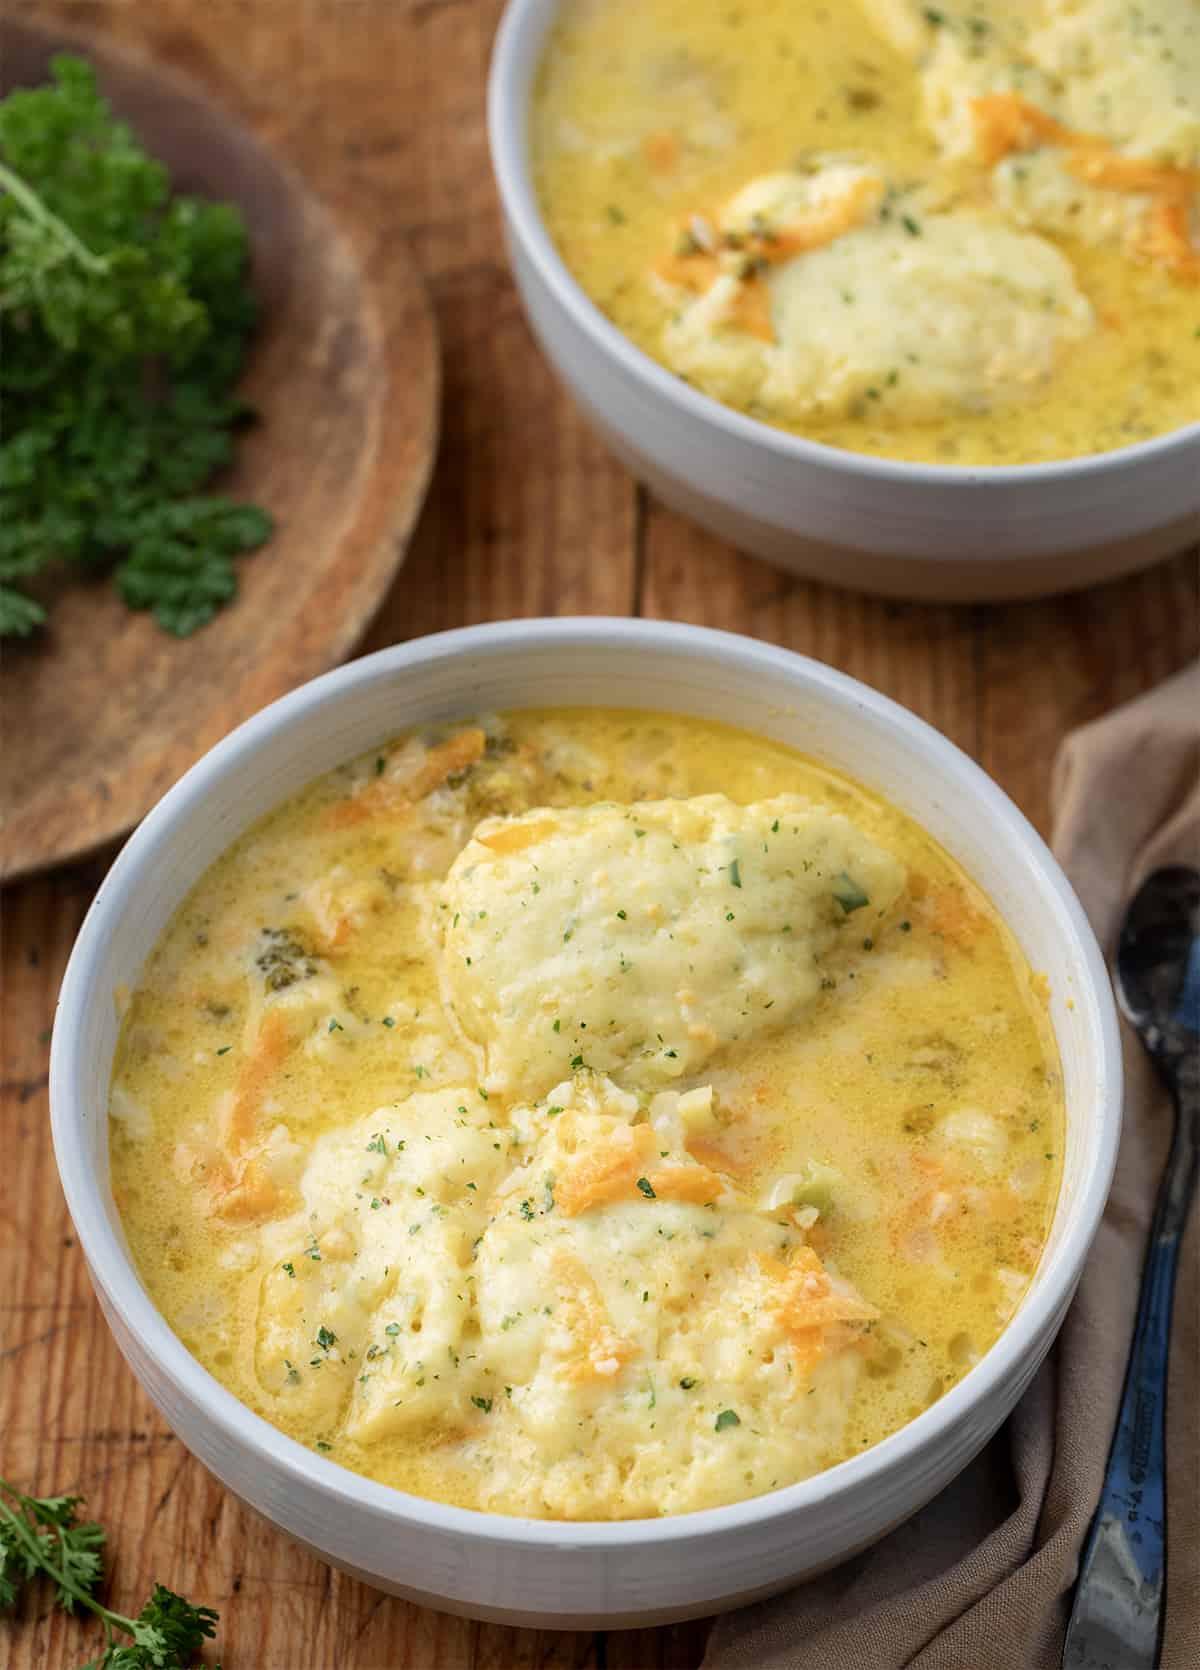 Bowls of Broccoli Cheese Soup With Dumplings on a Wooden Table.